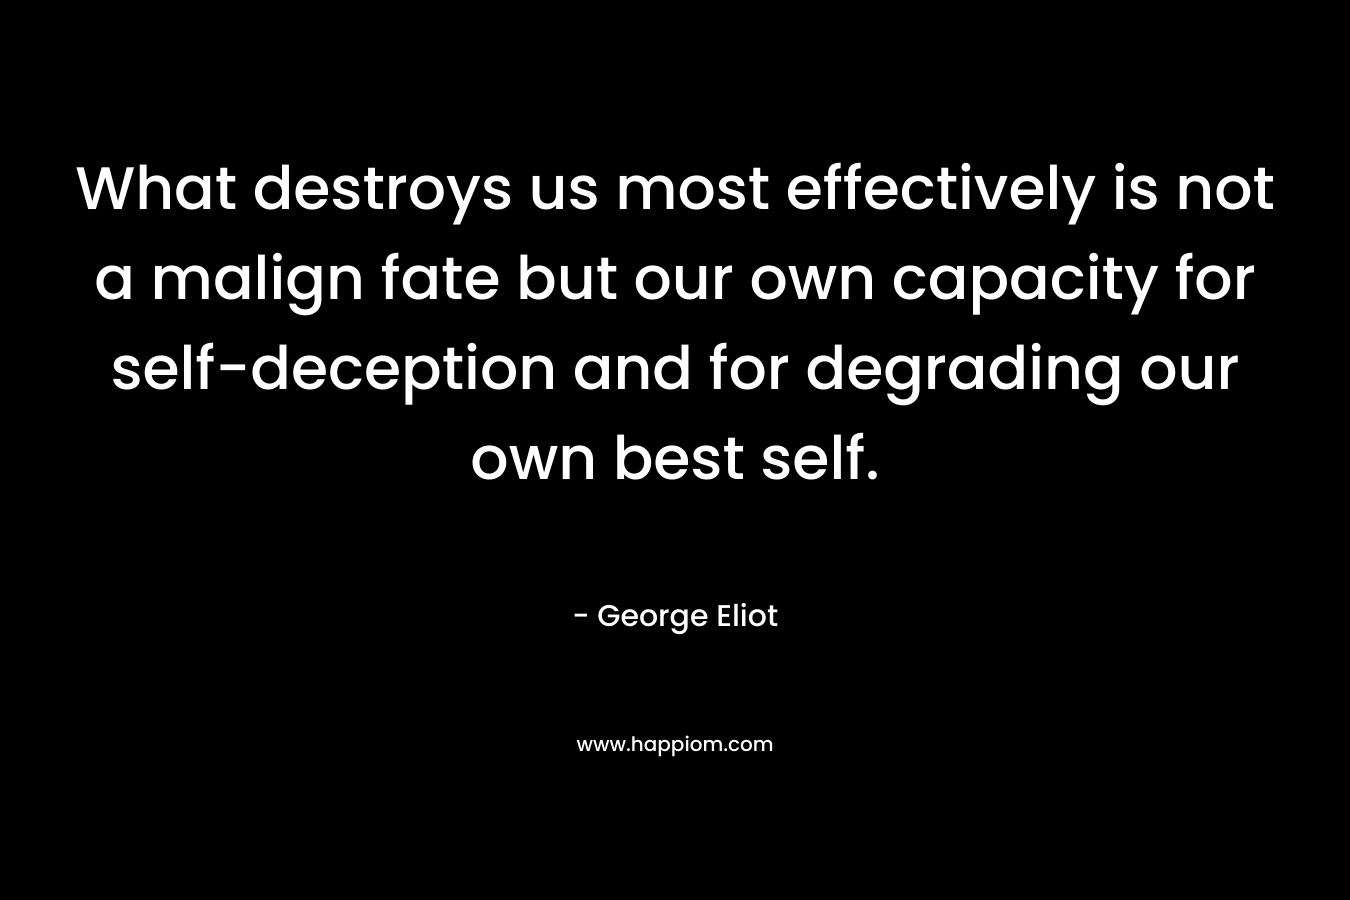 What destroys us most effectively is not a malign fate but our own capacity for self-deception and for degrading our own best self. – George Eliot